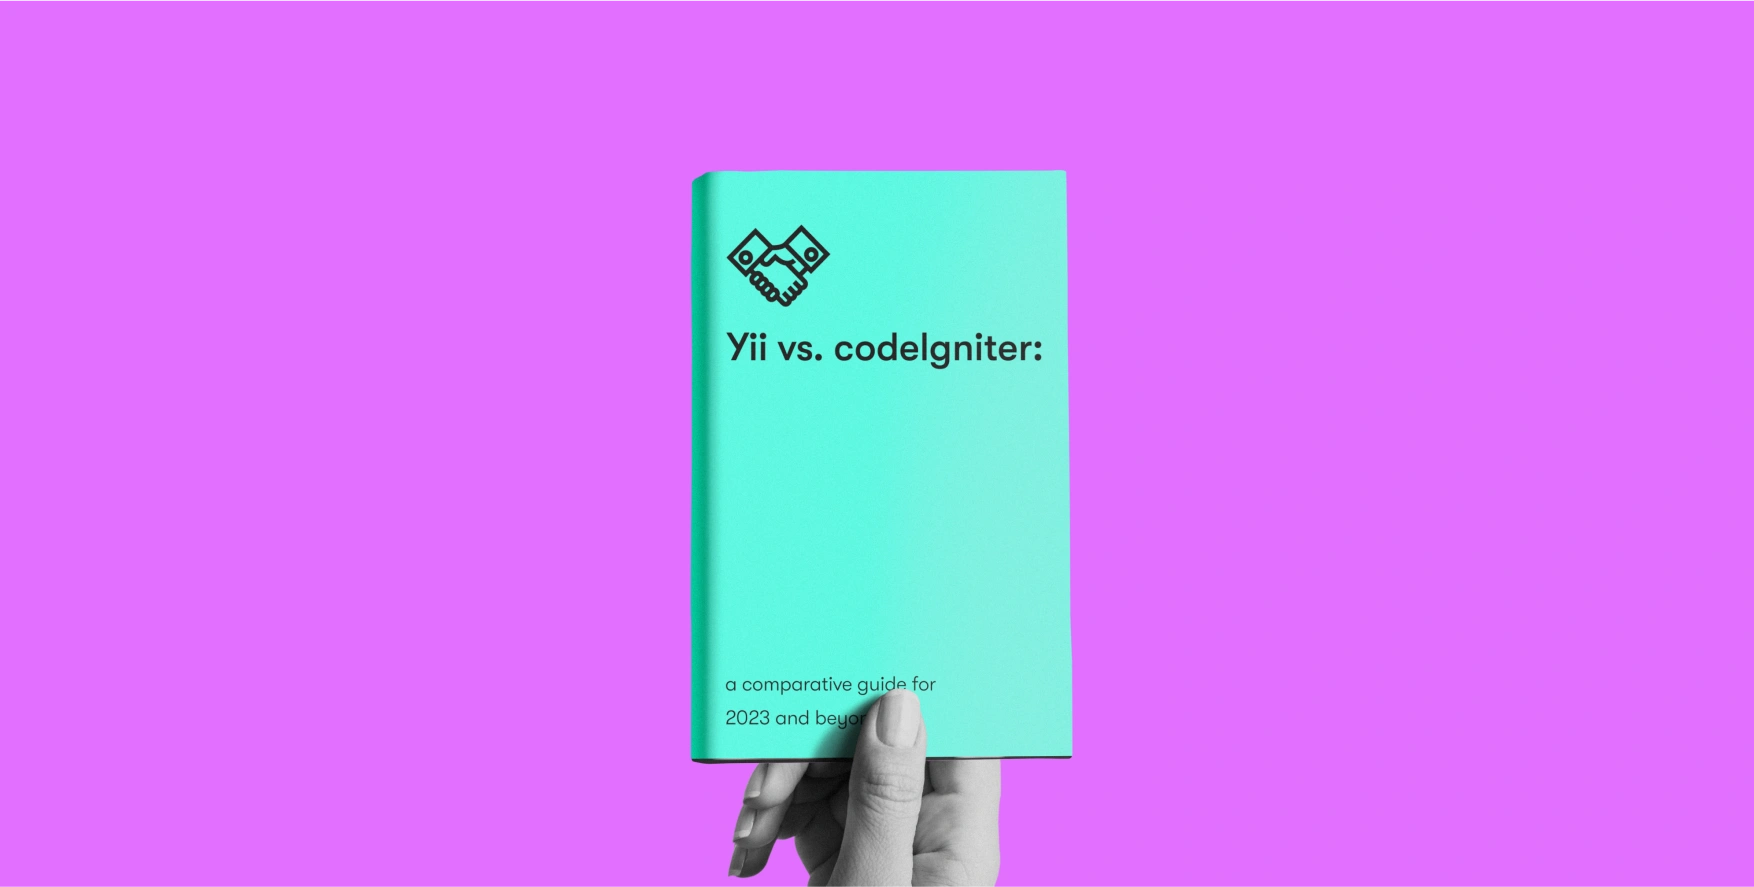 hand holding a book with a title Yii vs. CodeIgniter on purple background